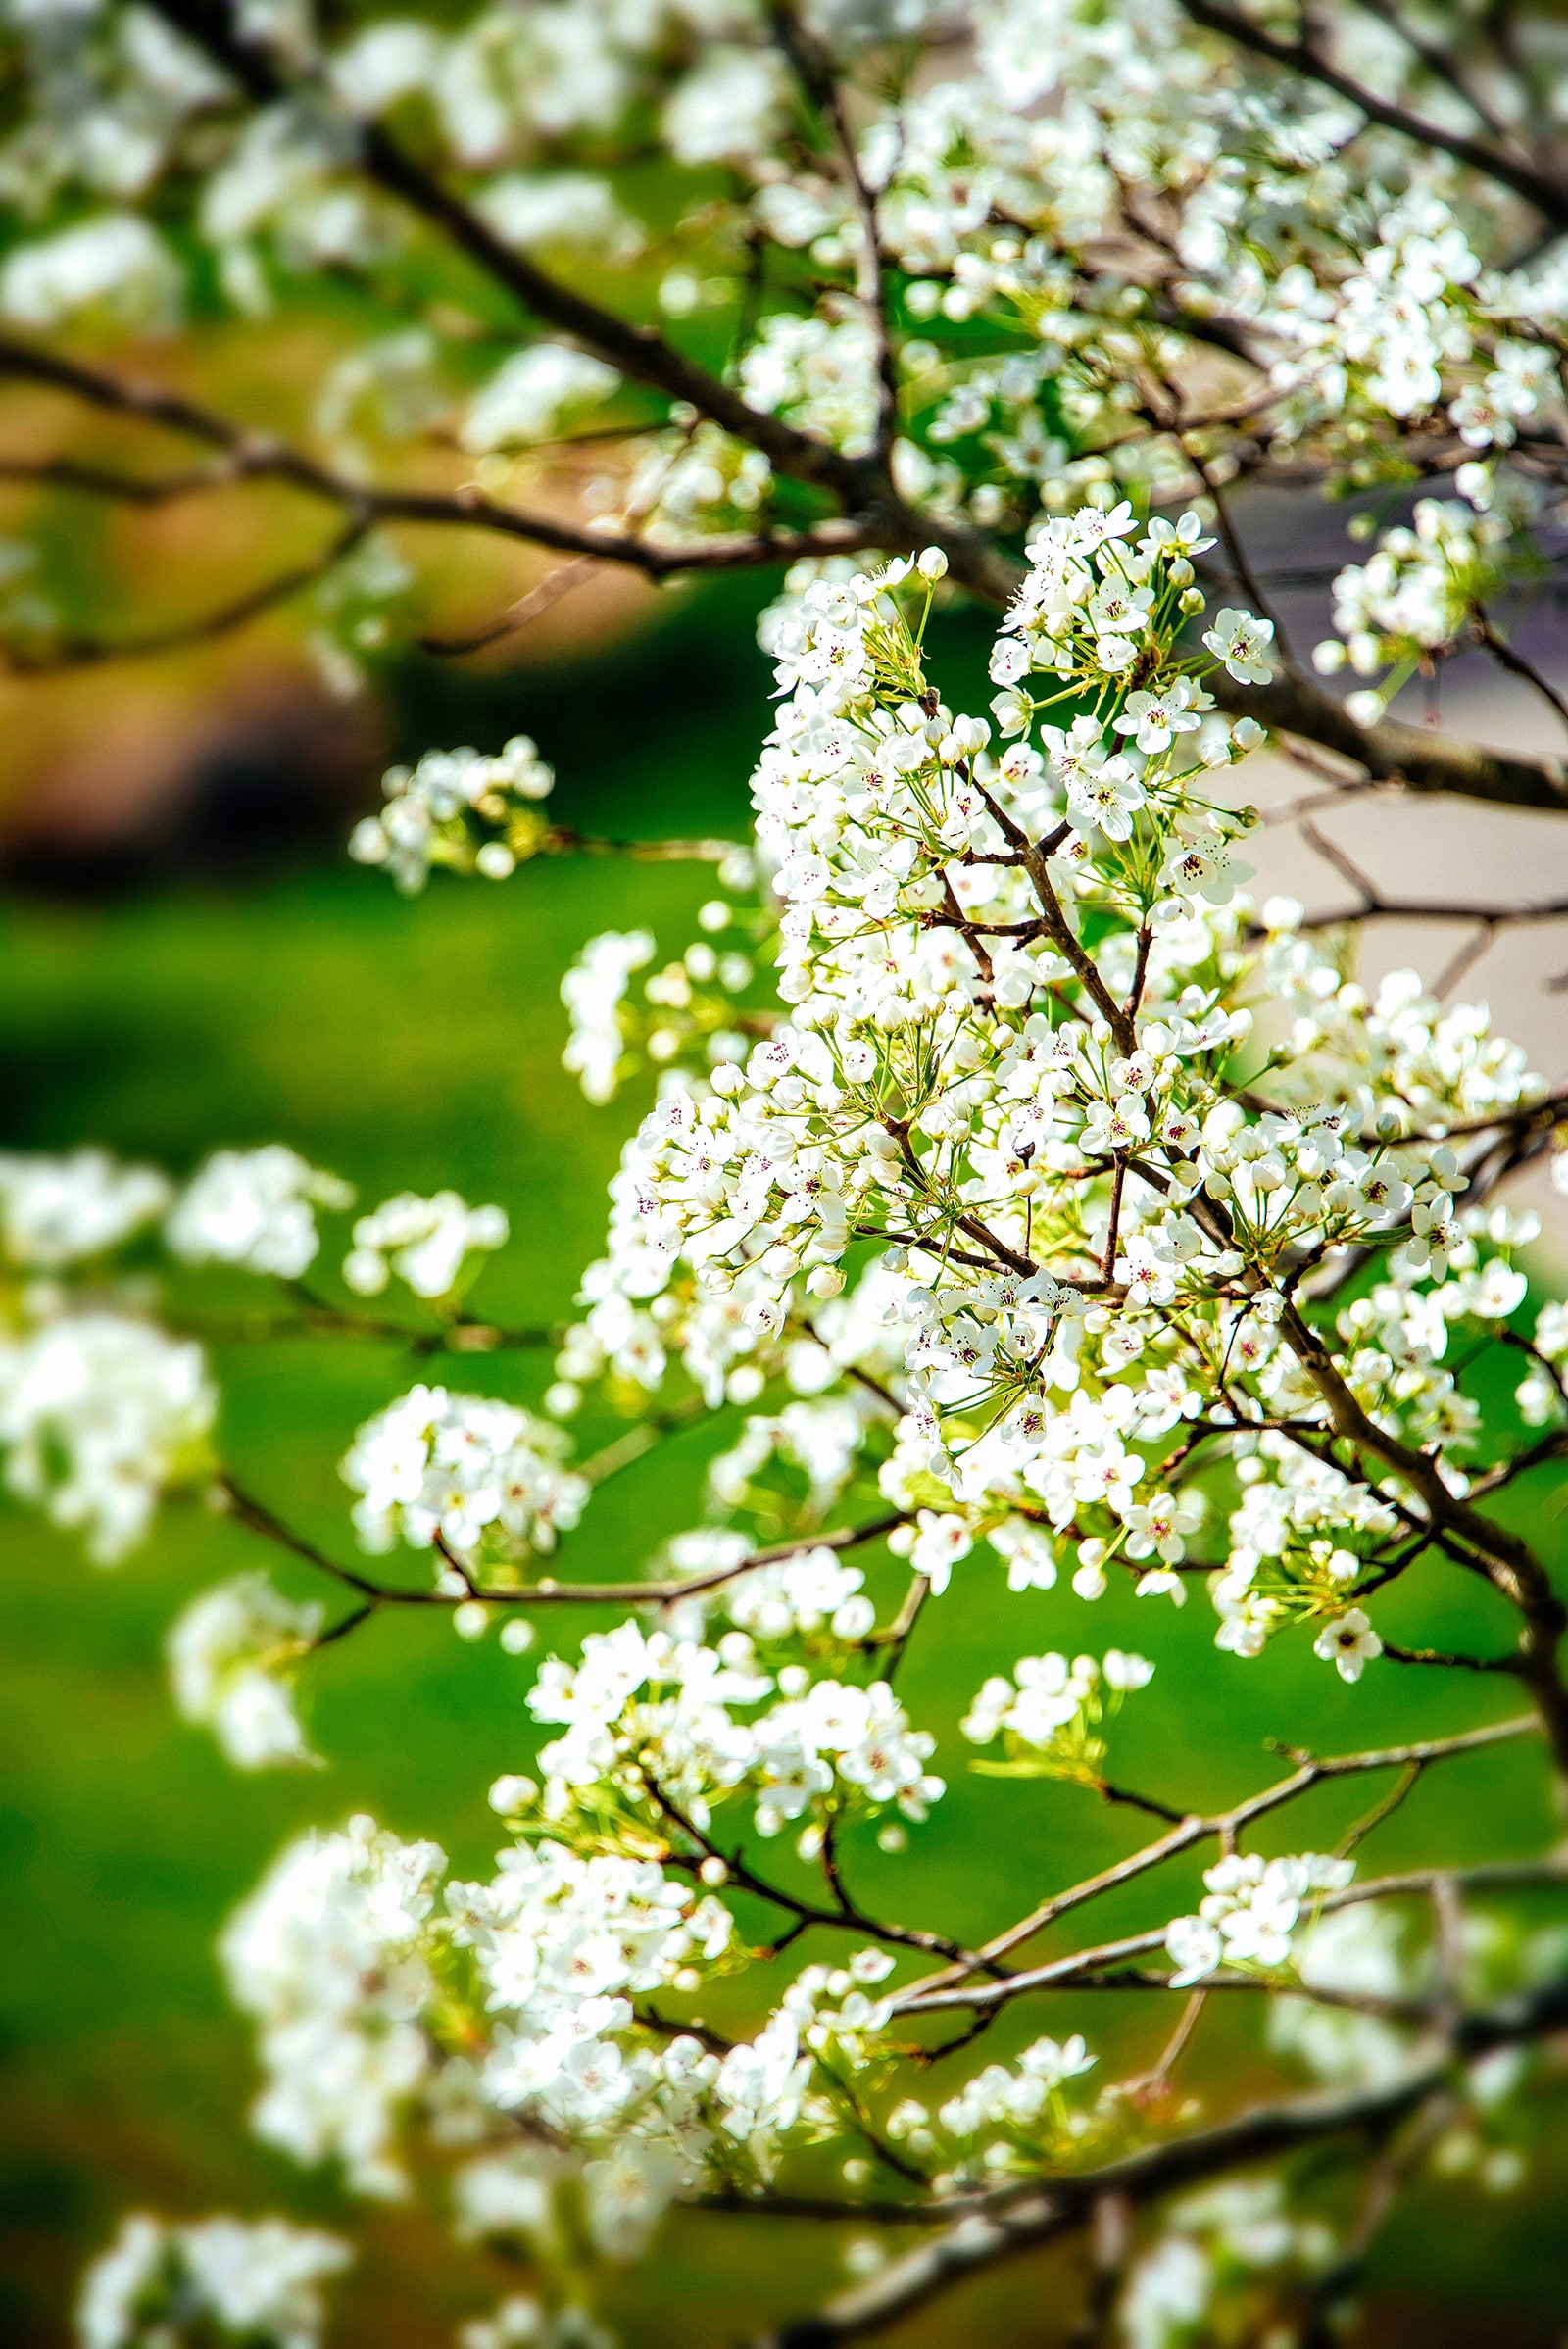 Fast-growing Cleveland pear tree branches covered in white flowers